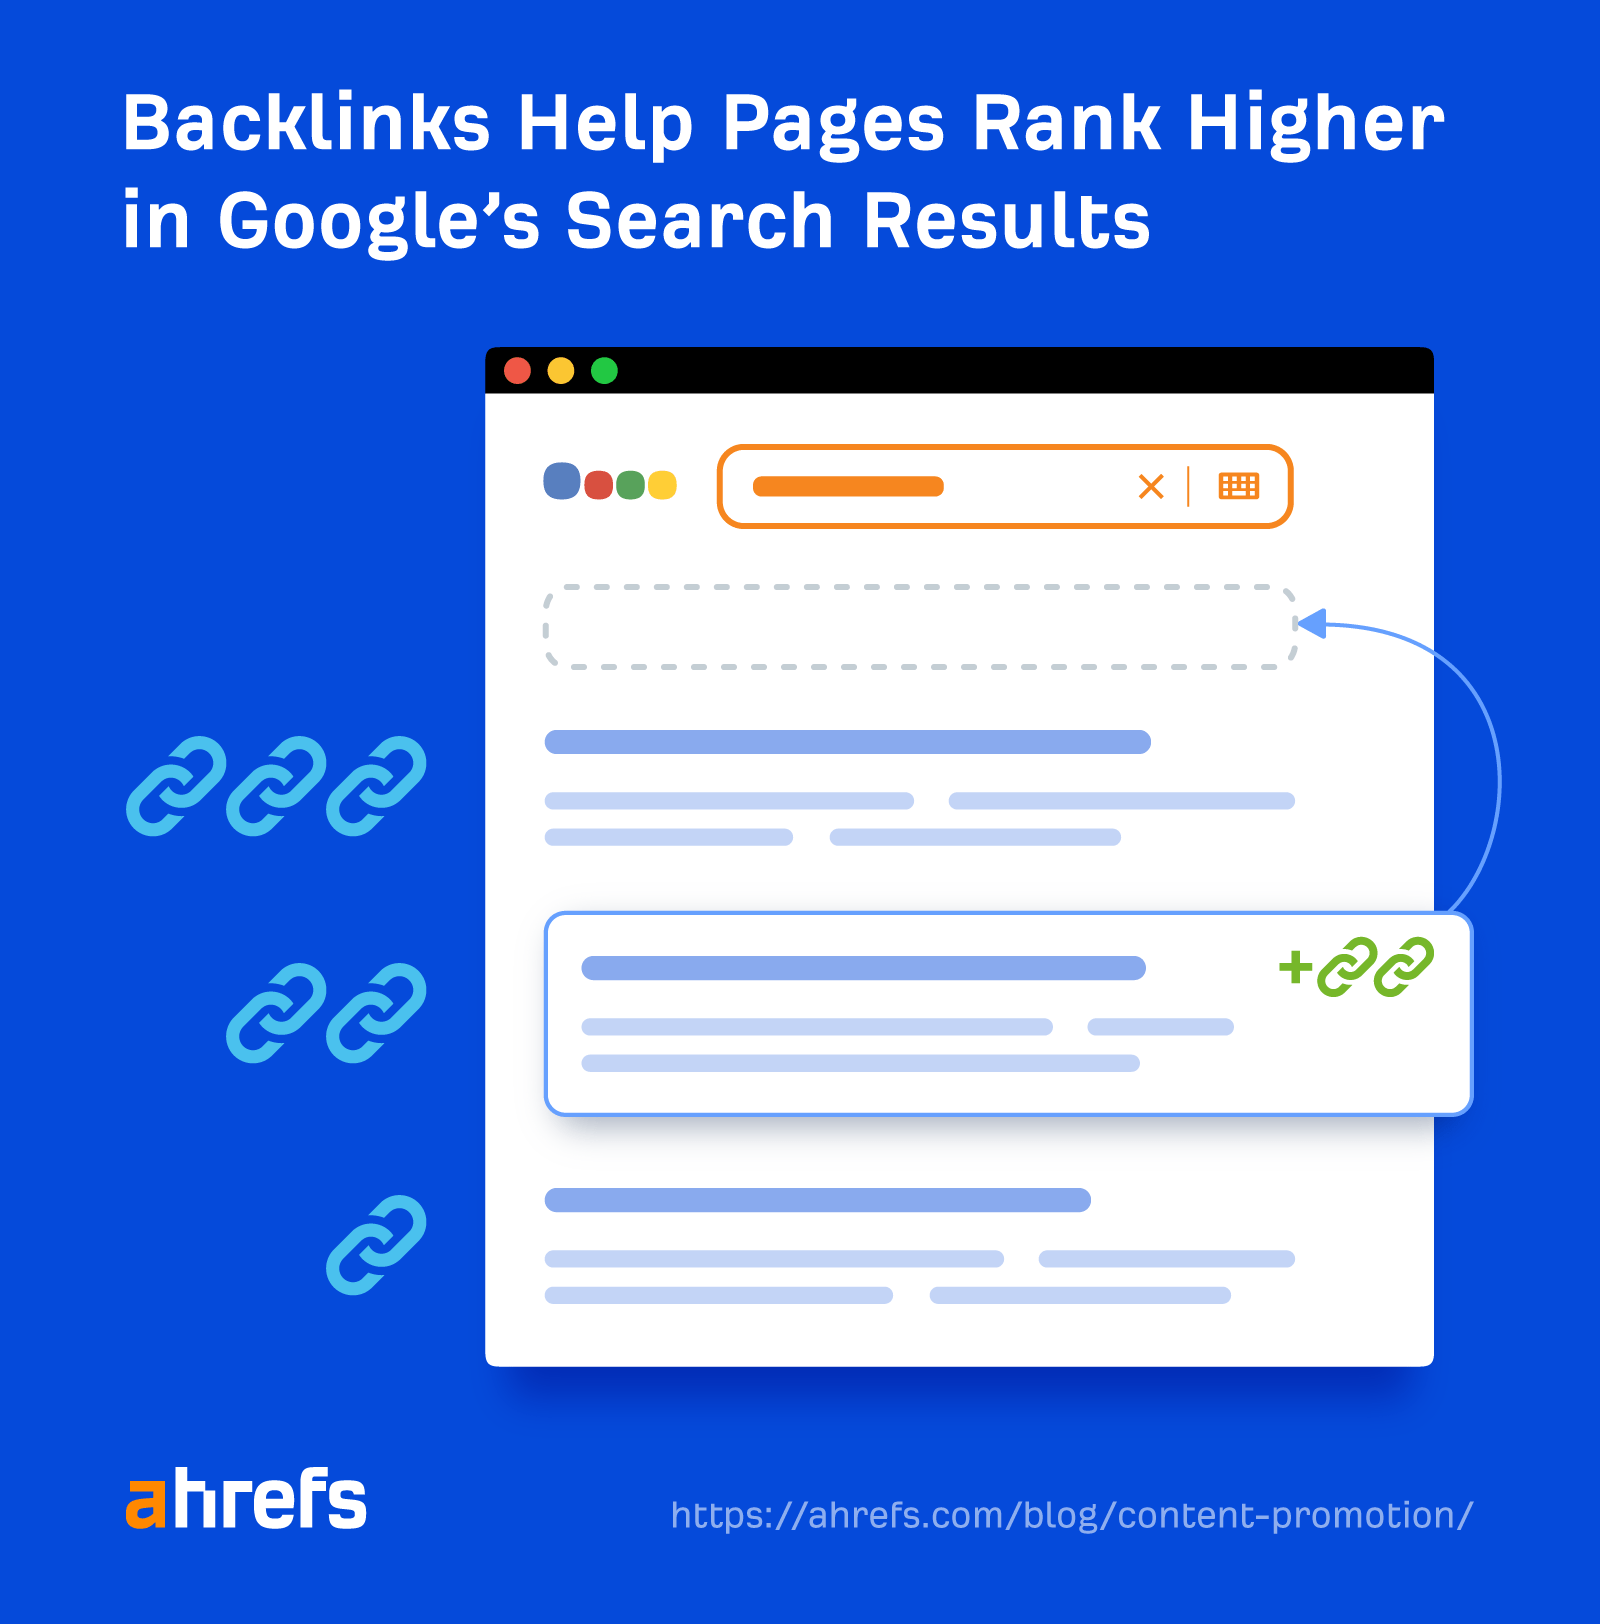 Visual representation showing backlinks help pages rank higher in Google